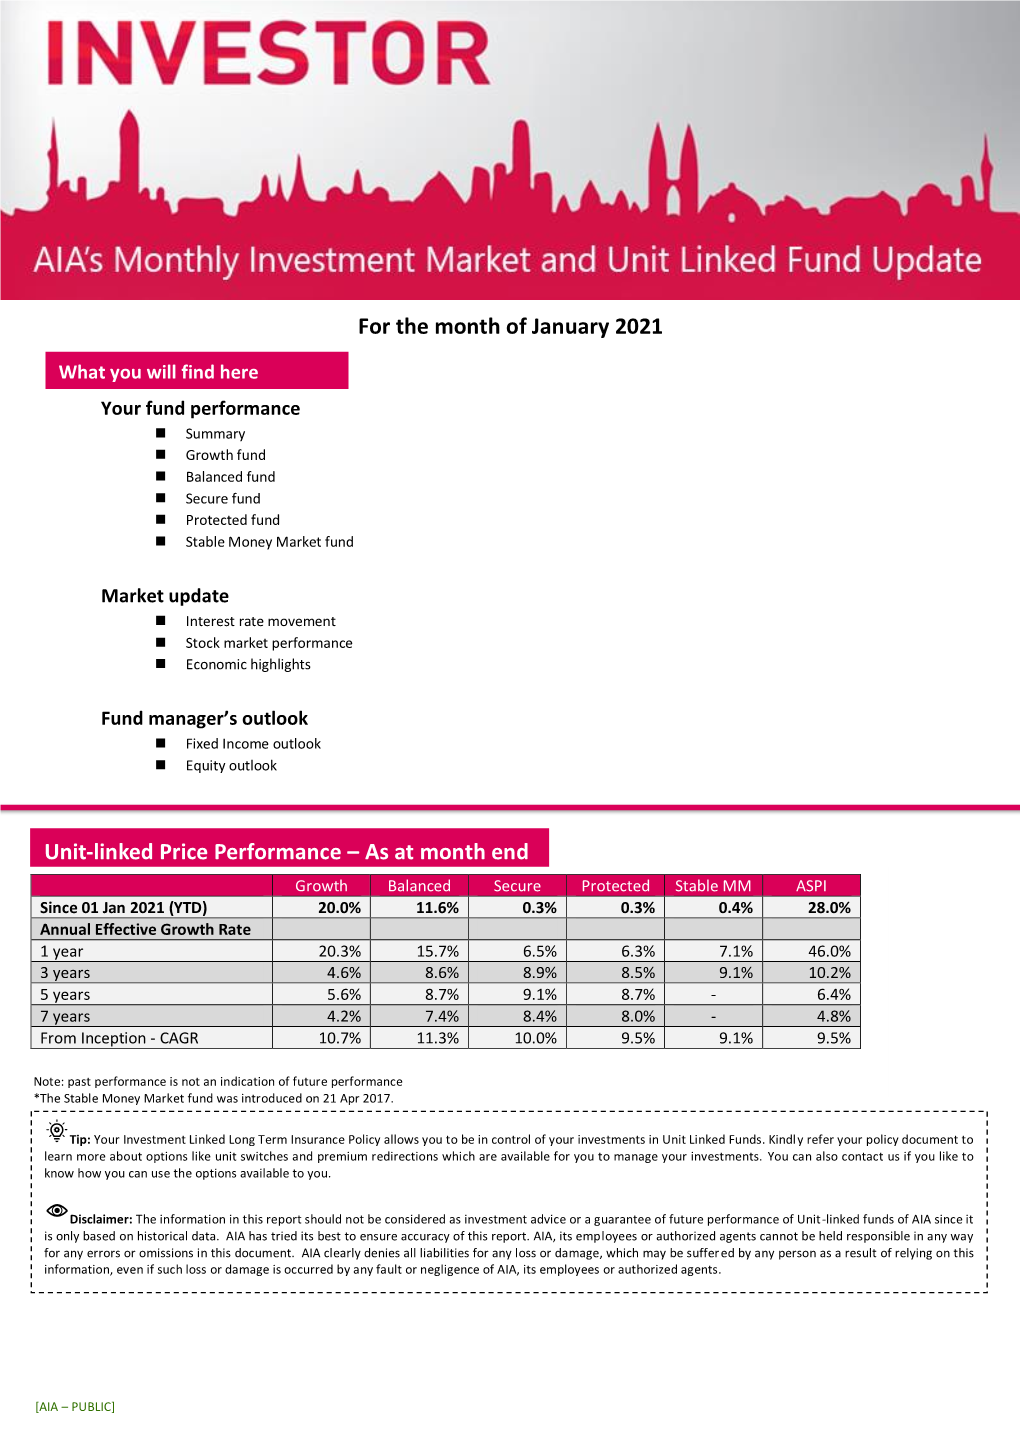 Unit-Linked Price Performance – As at Month End